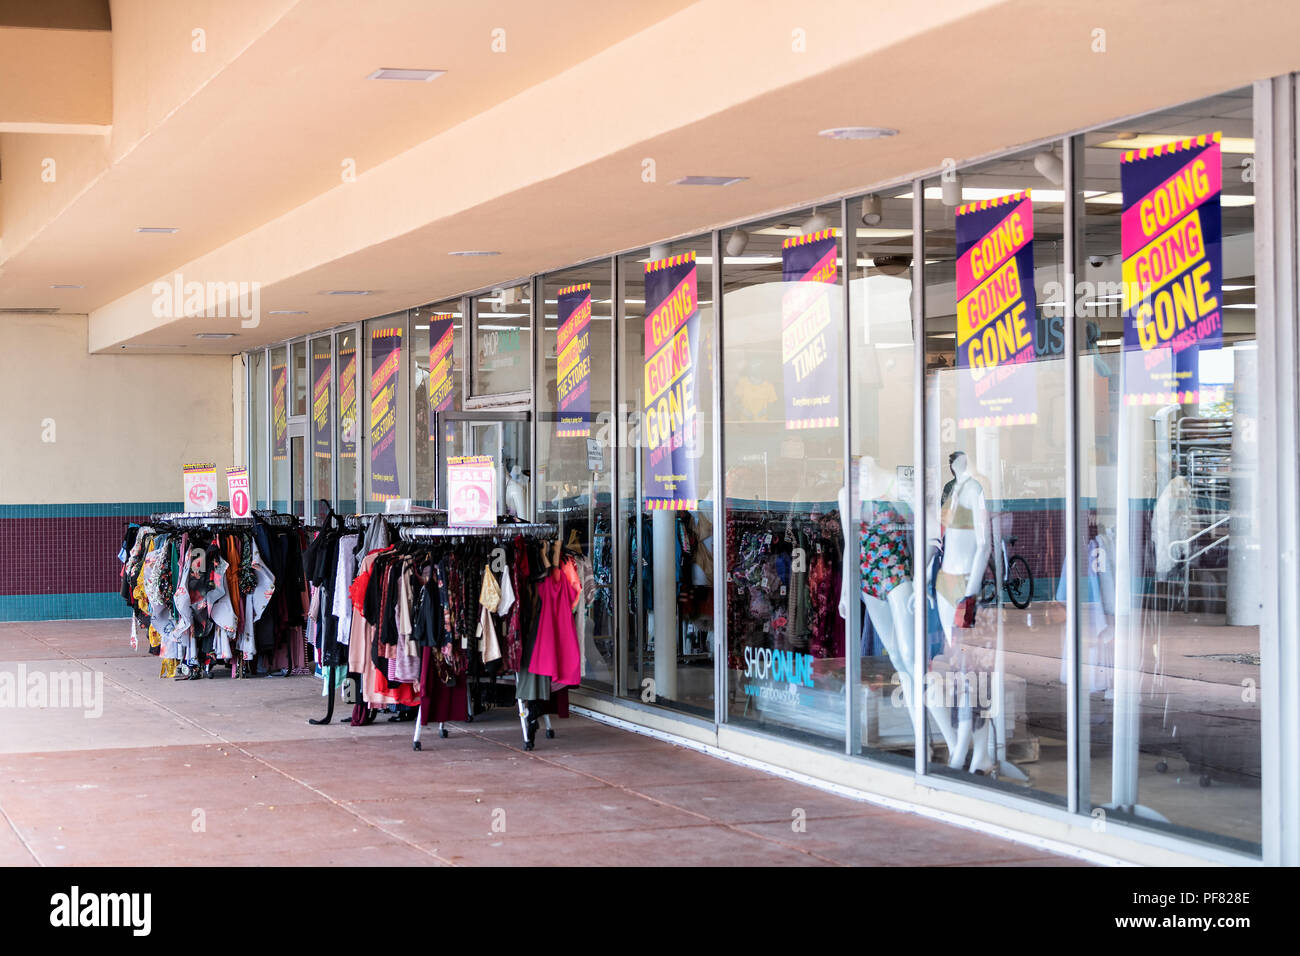 Key West, USA - May 1, 2018: Rainbow Shops specialty store, storefront in outdoor shopping mall selling discount clothing, clothes, apparel at sale, p Stock Photo